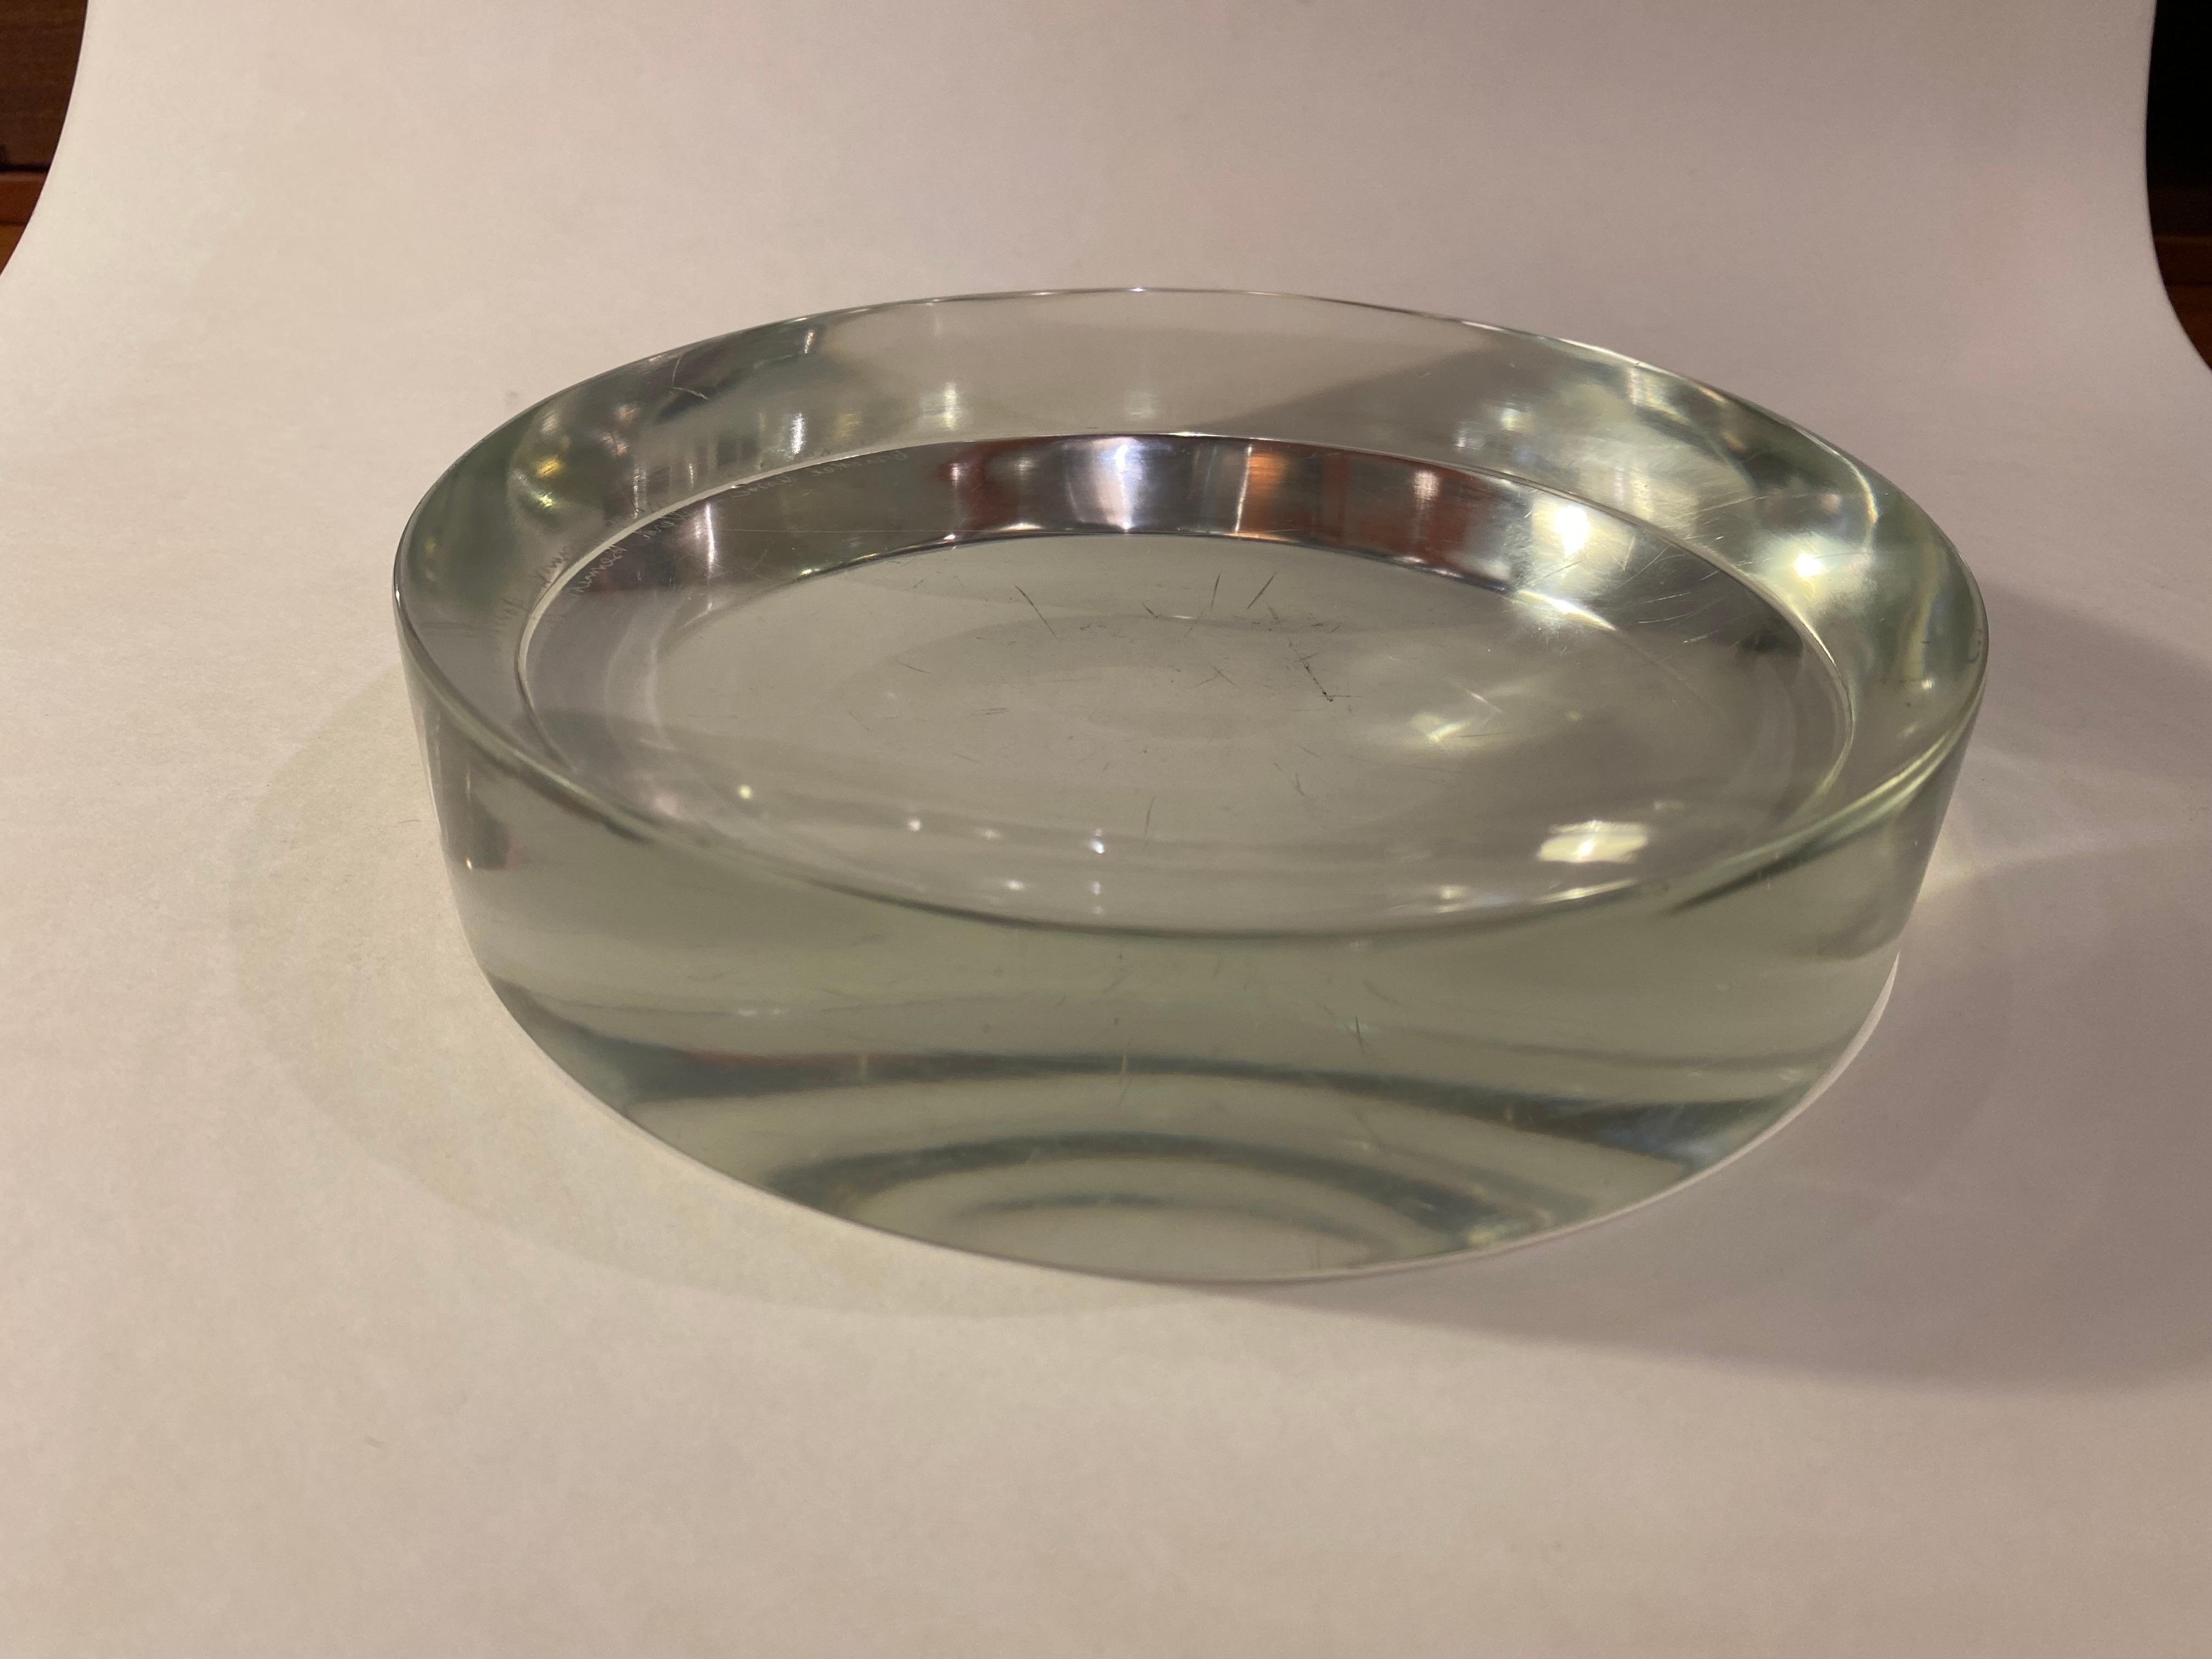 Ward Bennett for Brickel Vide-Poche Glass Dish. Ground bottom, classic simple shape perfect for coins, keys or those watches. Bottome shows scratches as you can see in photos.